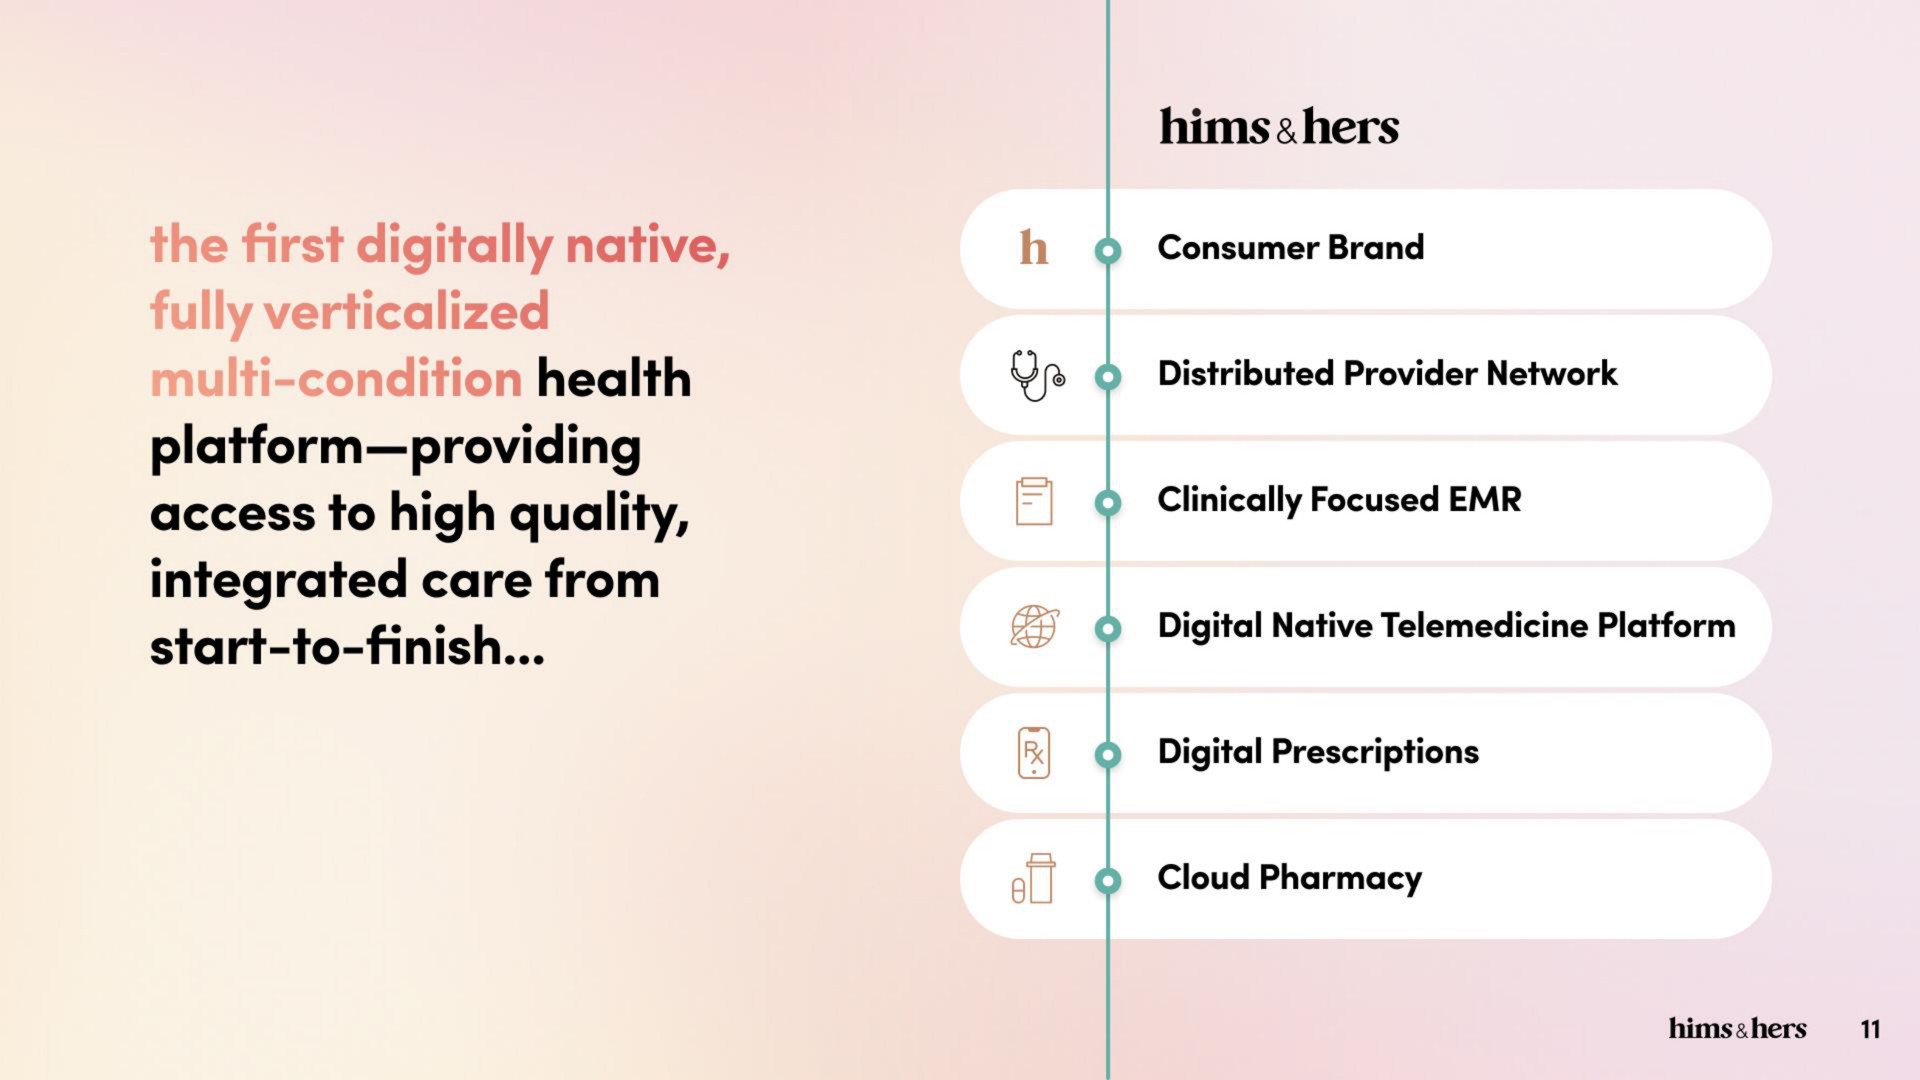 hers platform providing access to high quality integrated care from start to finish | Hims & Hers